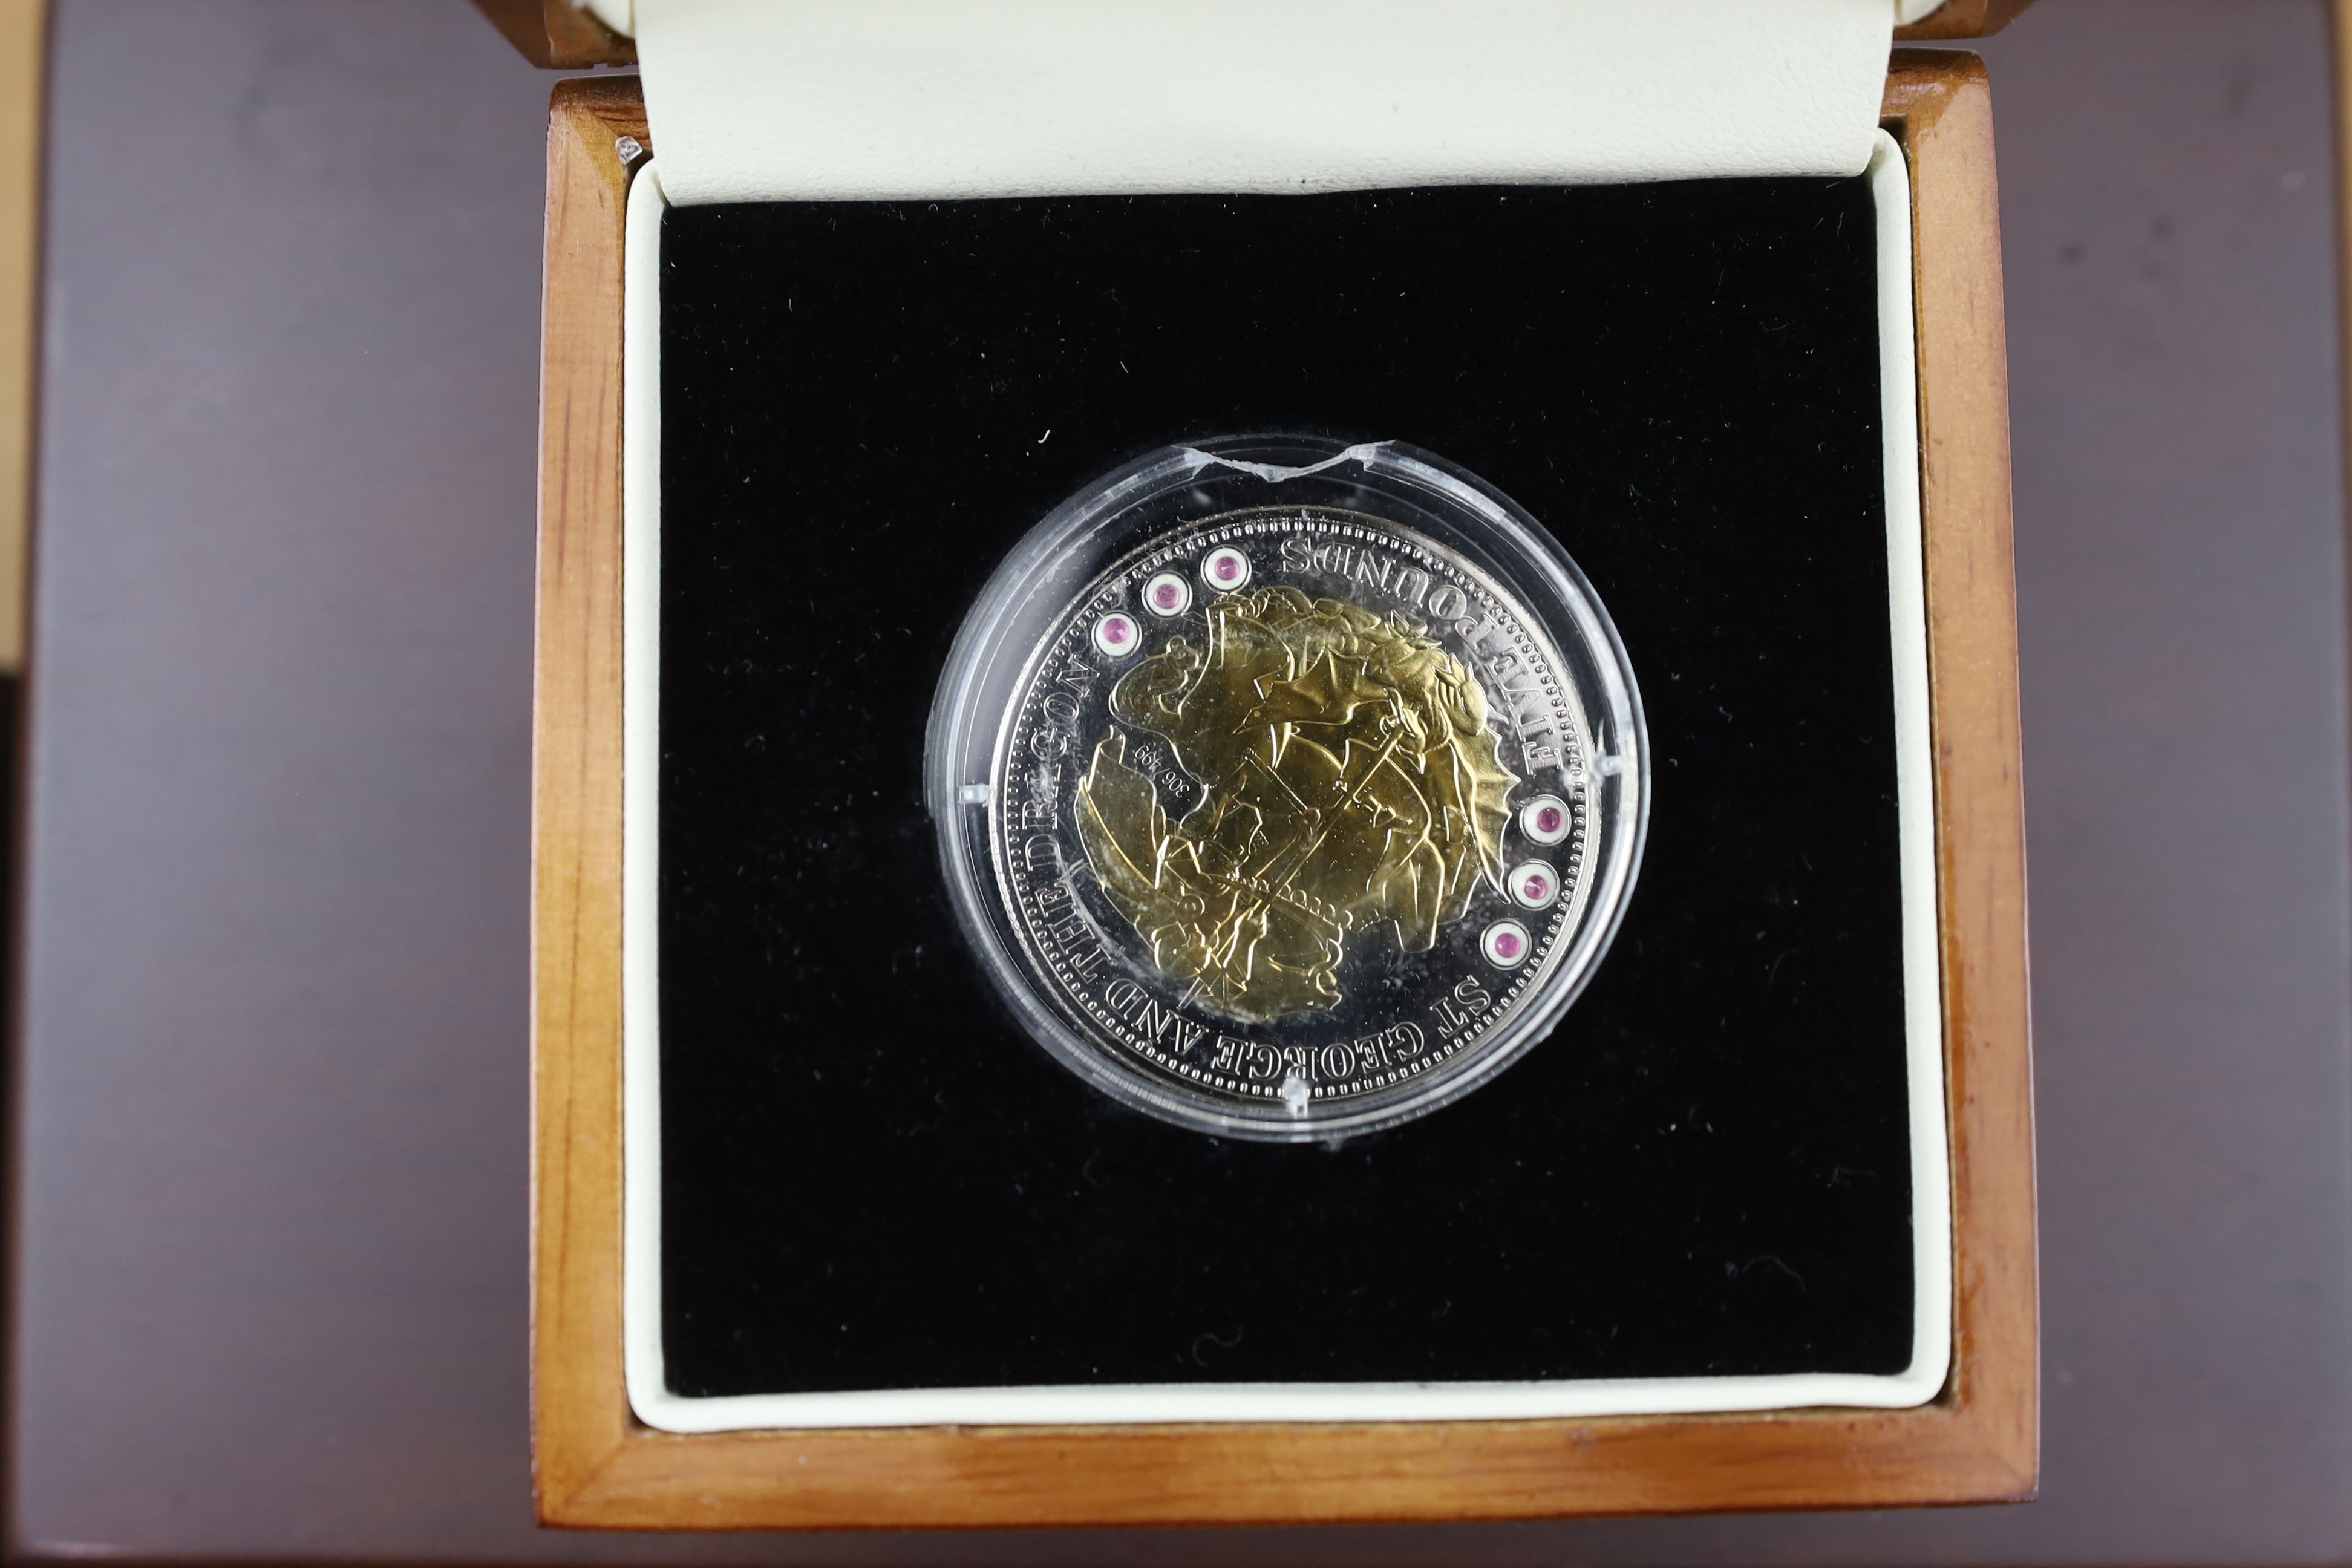 QEII and modern commemorative proof silver coins - Jersey 2014 2oz. ‘100 poppies’ coin, the First World War Centenary 2oz. numisproof, two London Mint 2009 Tristan de Cunha £5 coins, Royal Mint 2009 countdown XXX Olympia